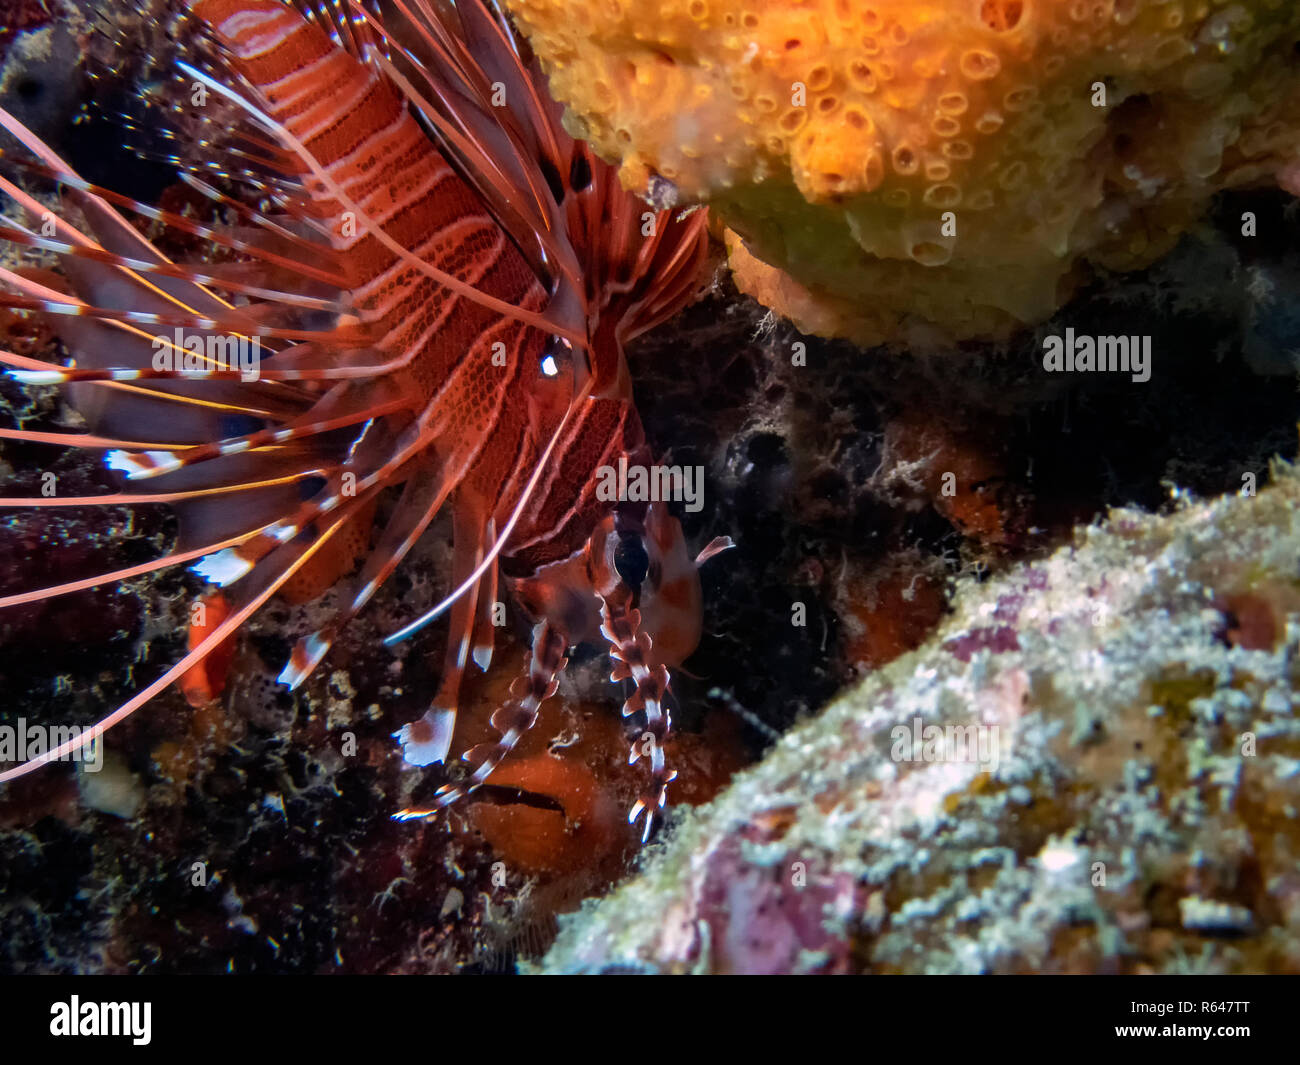 A Clearfin Lionfish (Pterois radiata) in the Indian Ocean Stock Photo